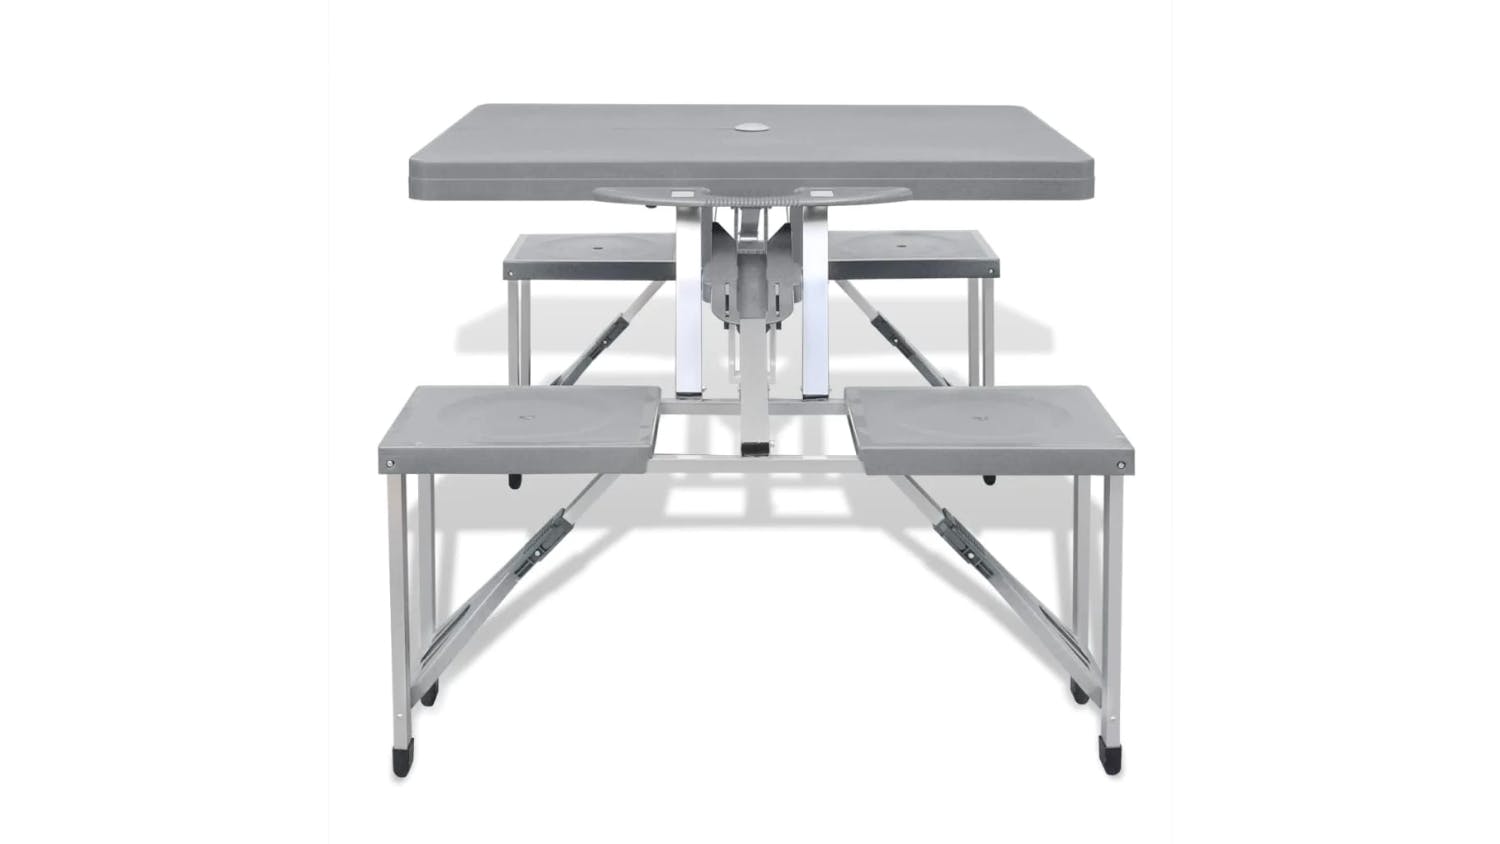 NNEVL Camping Table w/ Attached Stools Folding Extra Light - Grey